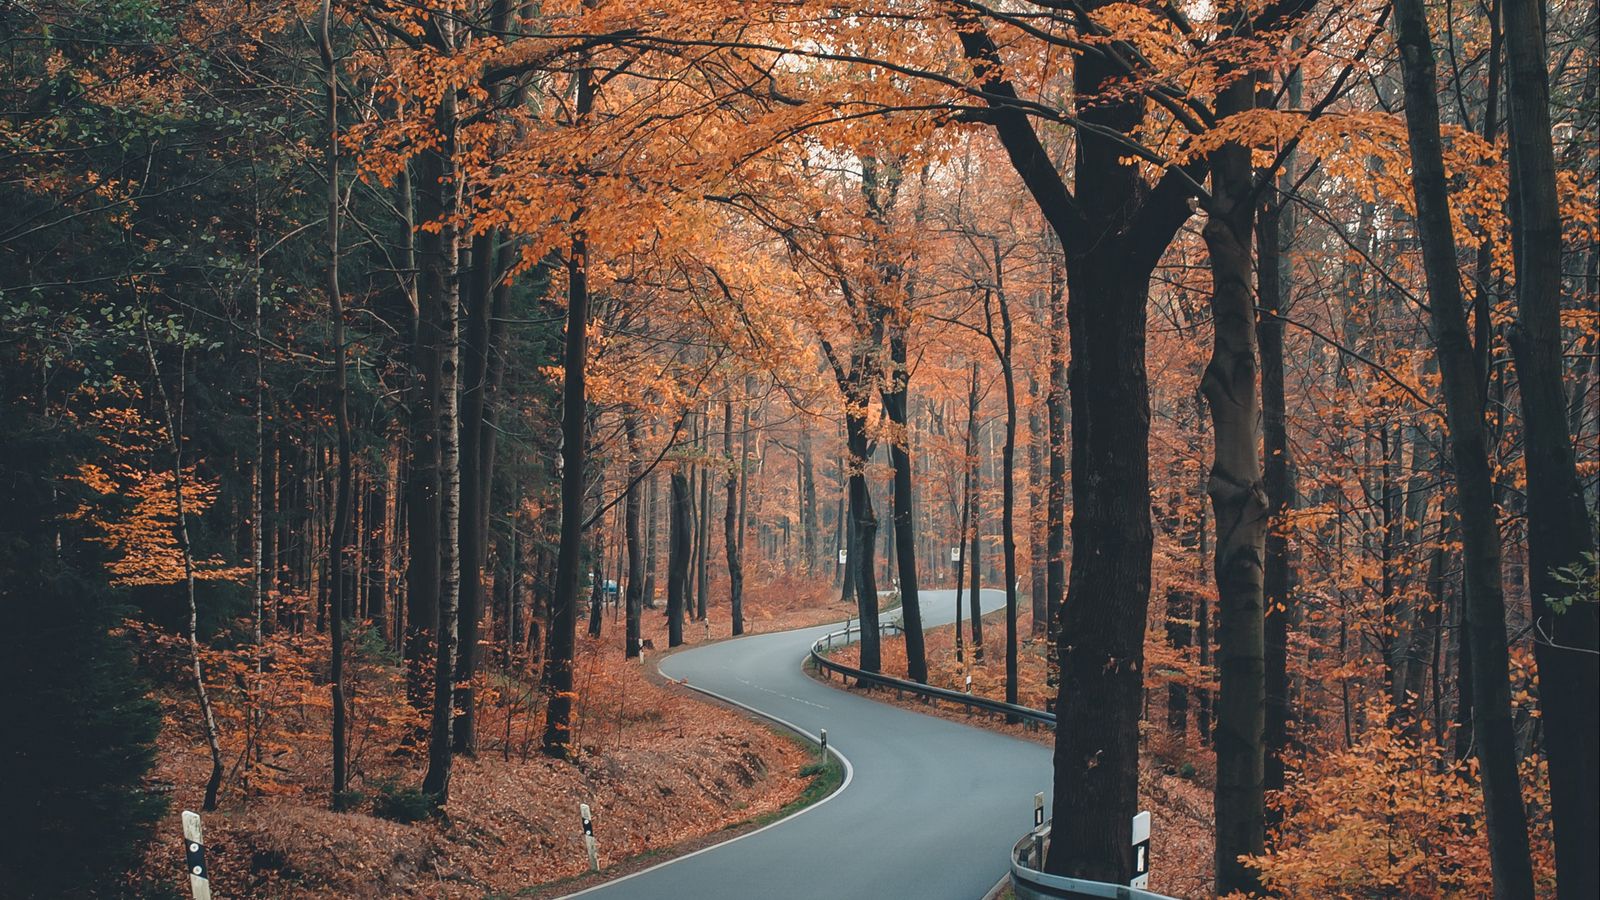 Download wallpaper 1600x900 alley, road, trees, winding, autumn widescreen  16:9 hd background